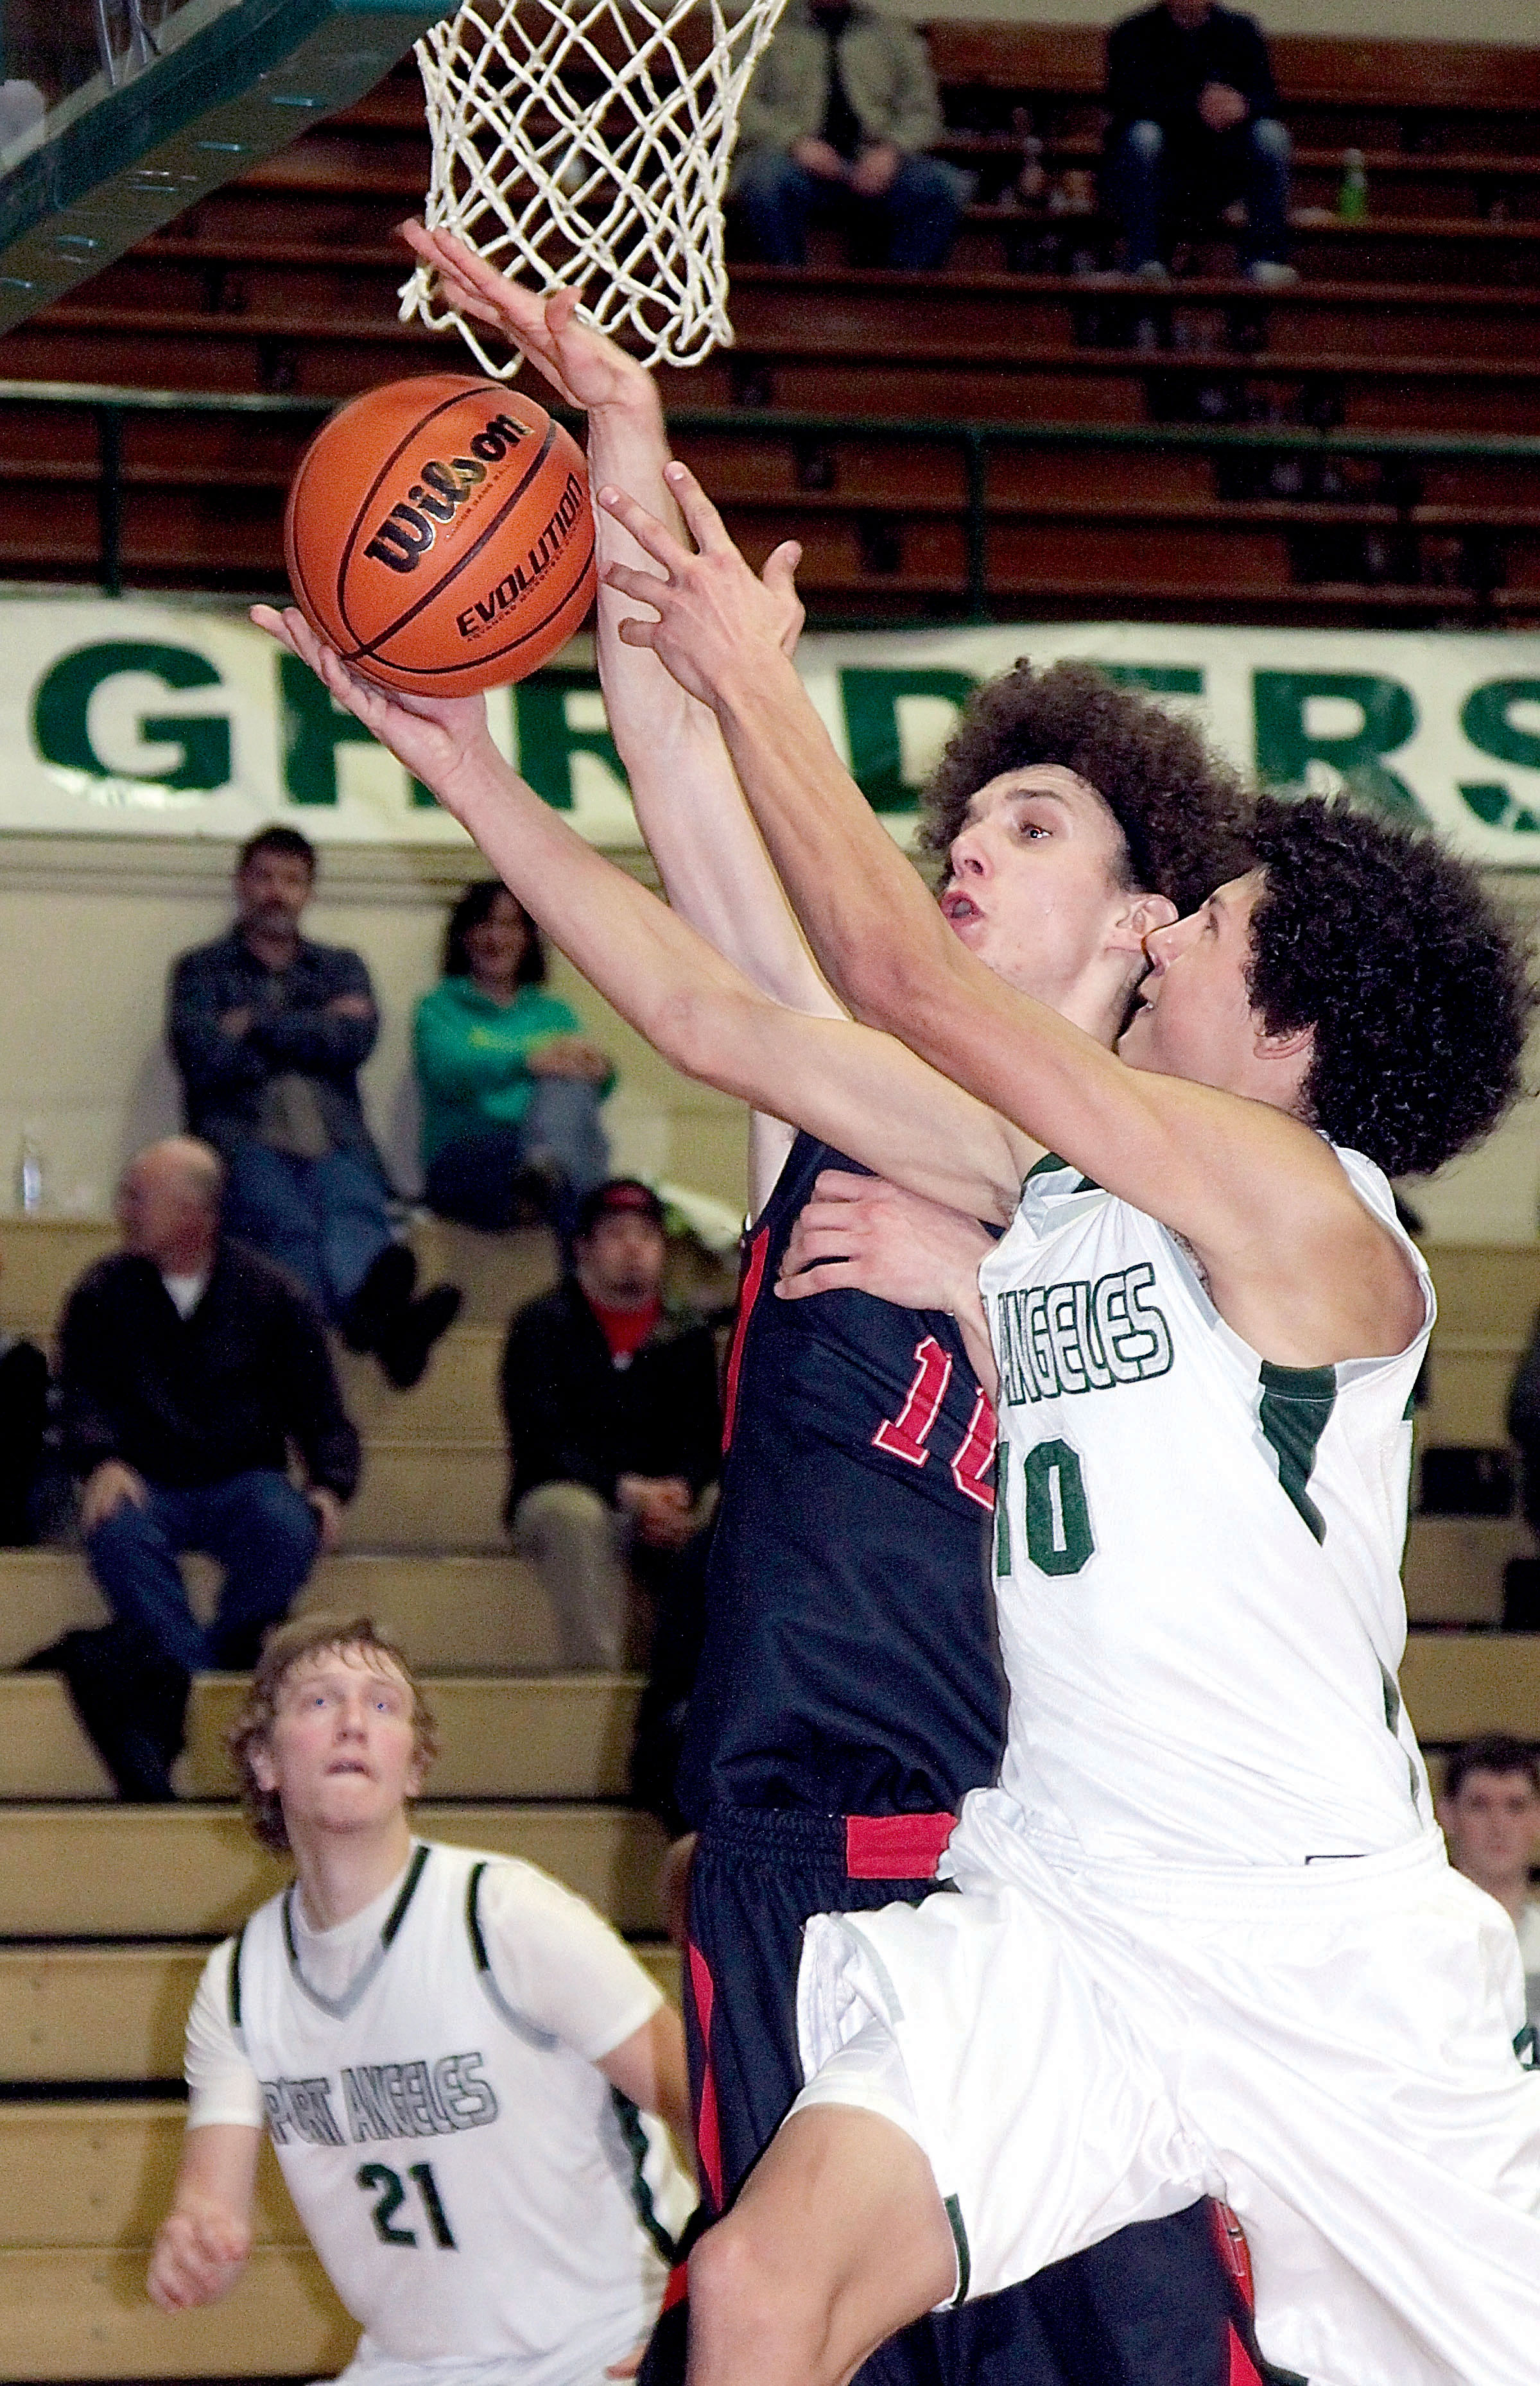 Port Angeles' Steven Lauderback has his shot blocked by Port Townsend's Paul Spaltenstein during the Roughriders' 57-54 win. Dave Logan/for Peninsula Daily News